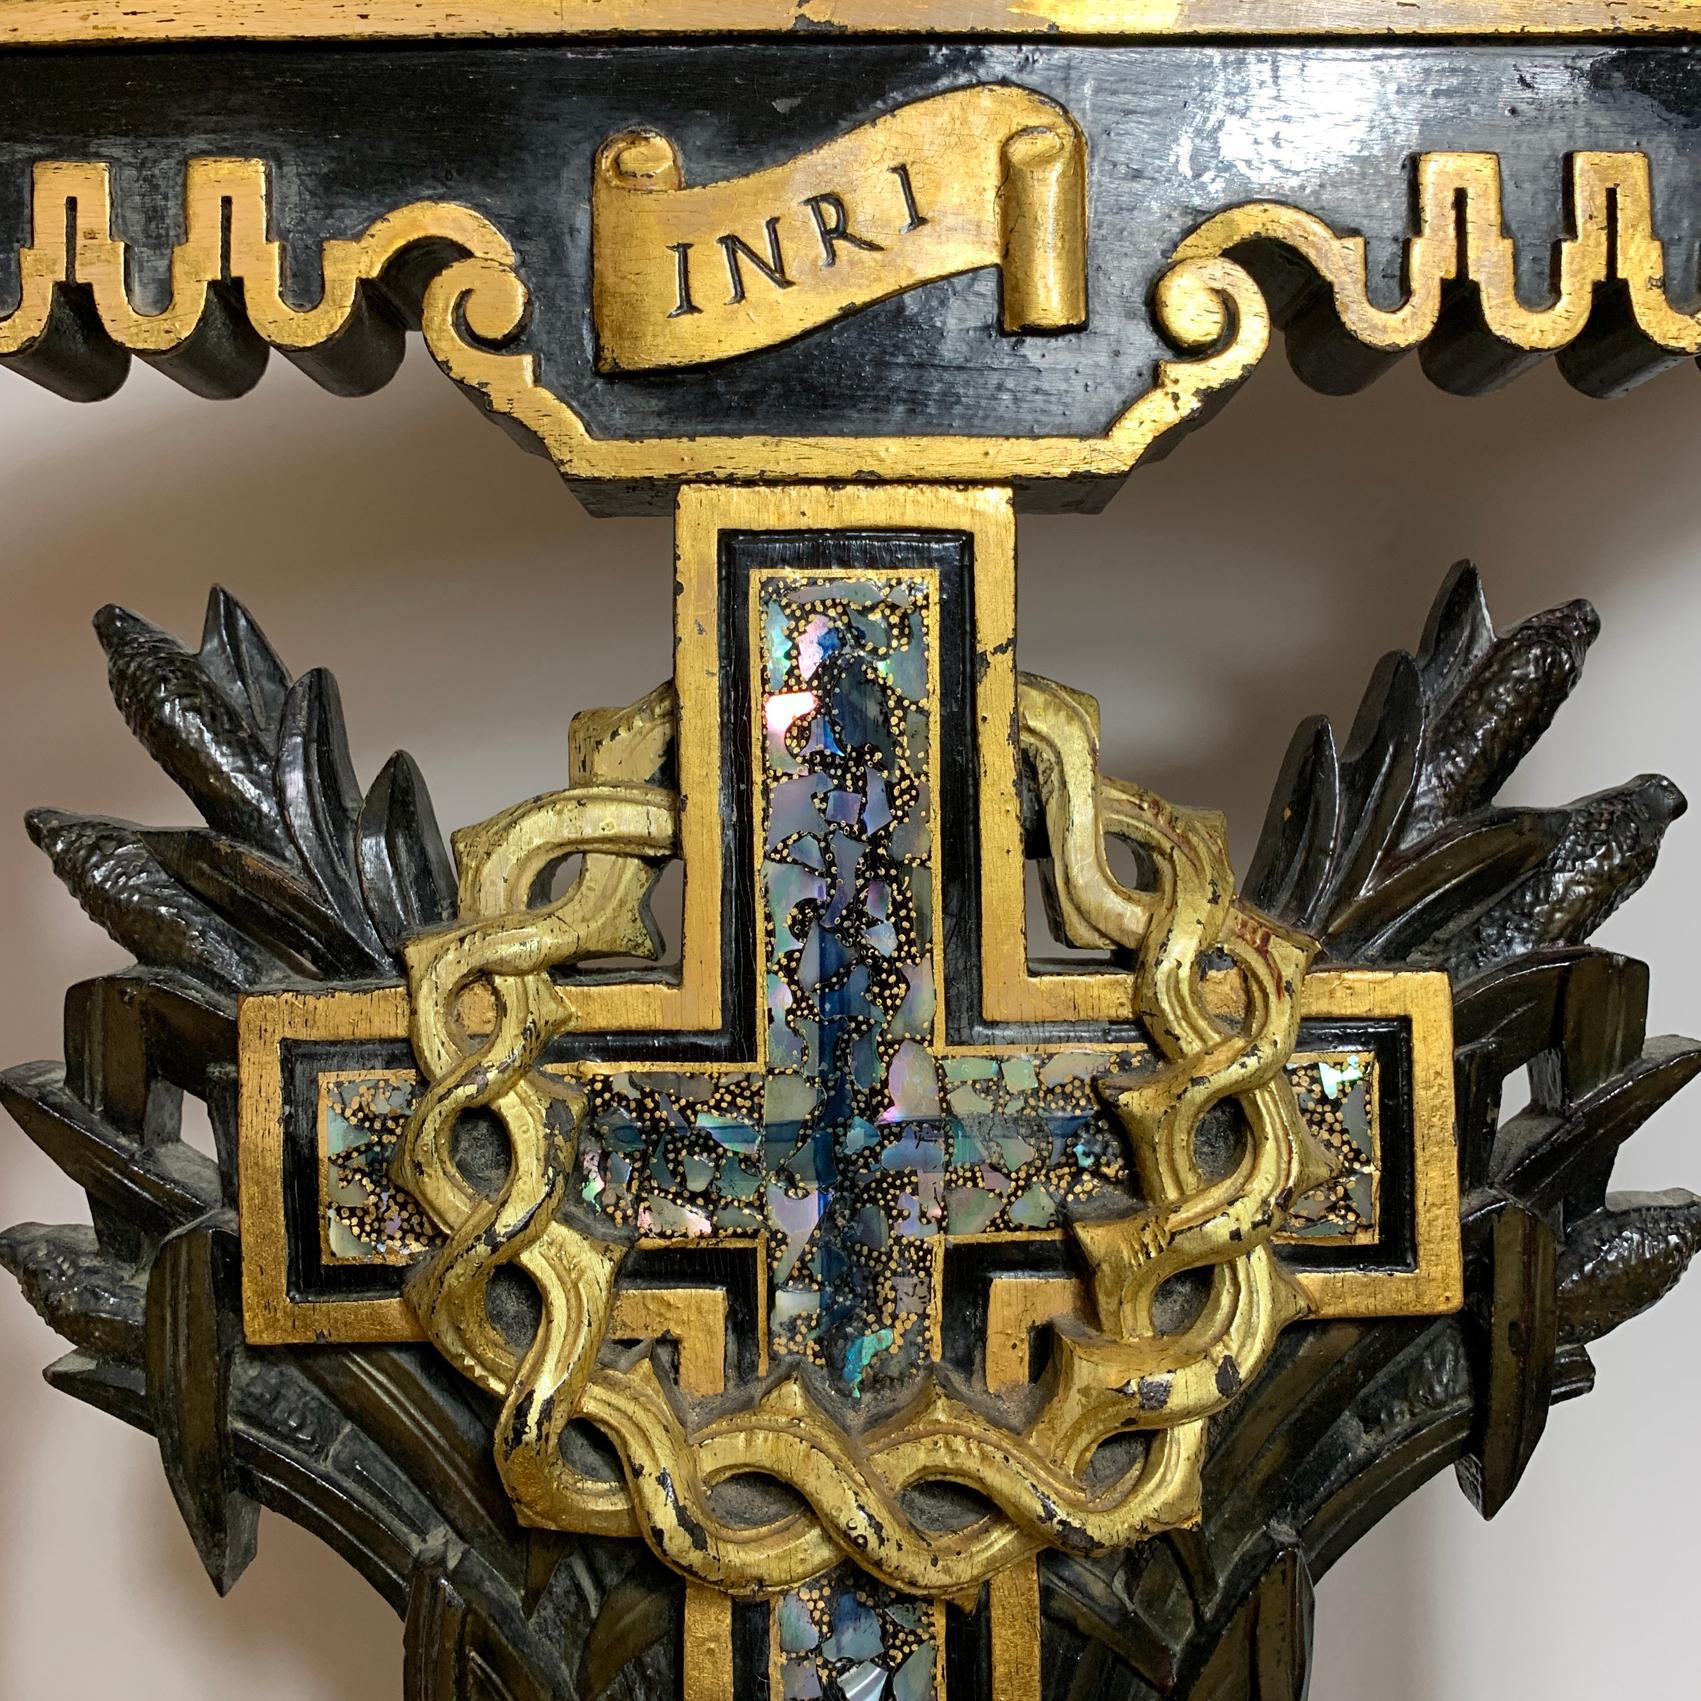 Early 19th century Prie Dieu French 'Prayer Chair'
French
Beautiful ebonized frame with carved leaves and crown of thorns surrounding and intricately detailed mother of pearl cross
The chair is heavily guilded all over
The seat and top pad are in